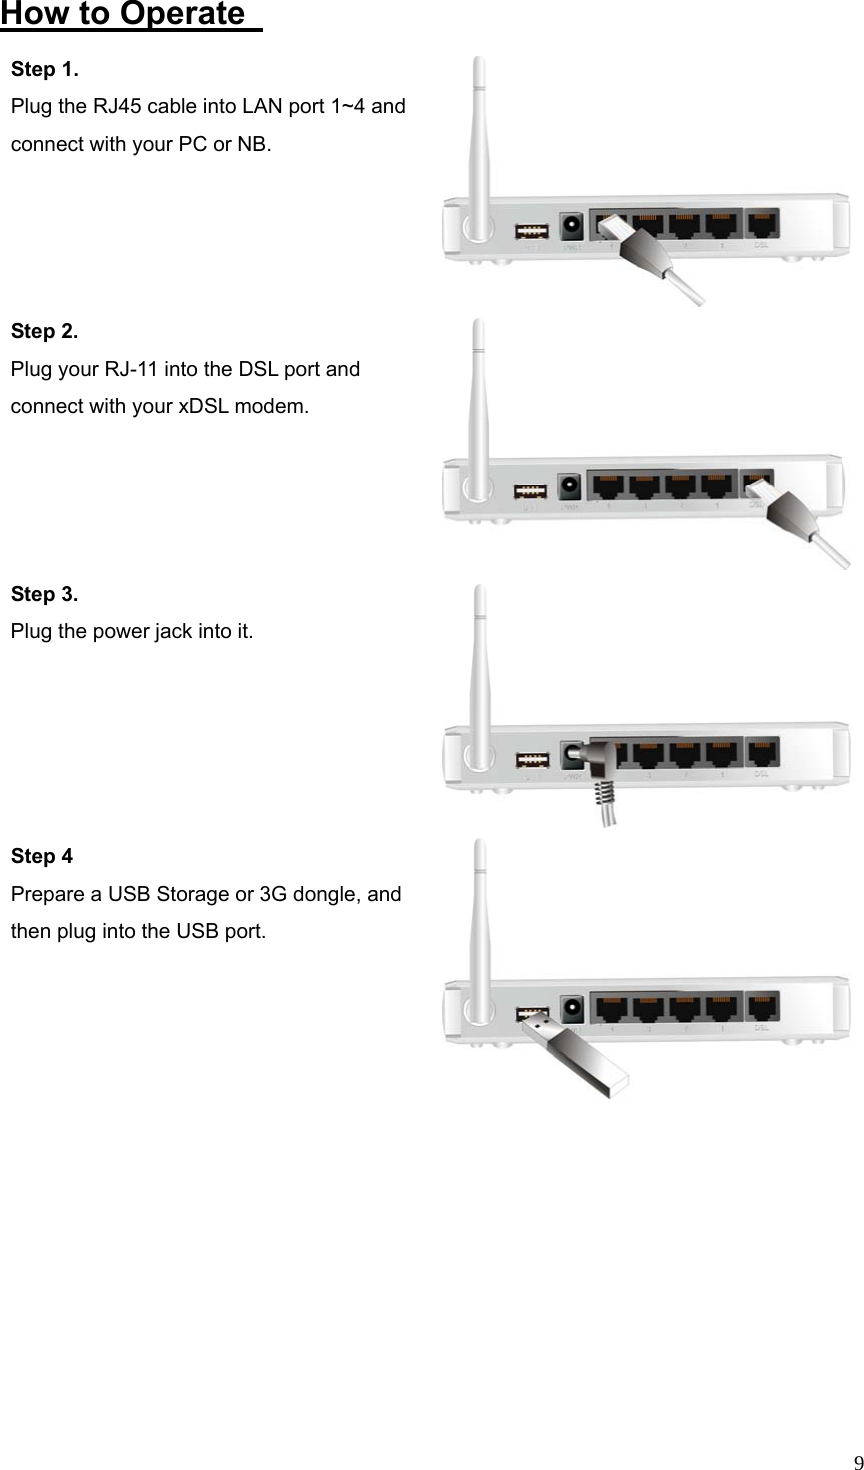  9How to Operate   Step 1.   Plug the RJ45 cable into LAN port 1~4 and connect with your PC or NB. Step 2.  Plug your RJ-11 into the DSL port and connect with your xDSL modem. Step 3.  Plug the power jack into it.   Step 4 Prepare a USB Storage or 3G dongle, and then plug into the USB port.  